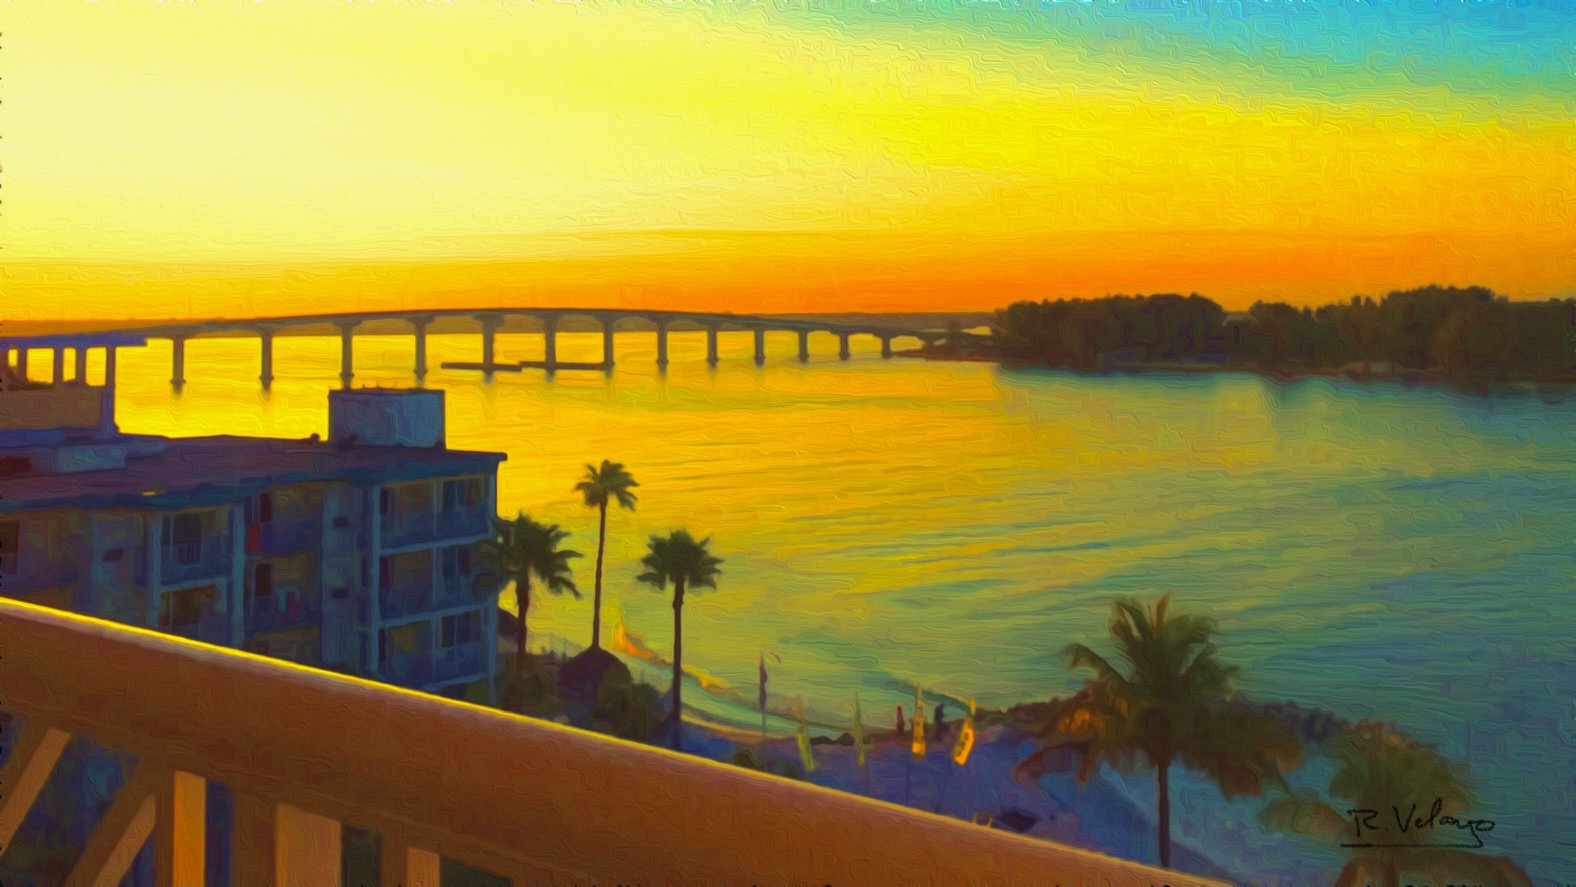 "HOTEL BALCONY OVERLOOKING CLEARWATER BEACH IN THE WINTER" [Created: 1/17/2021]